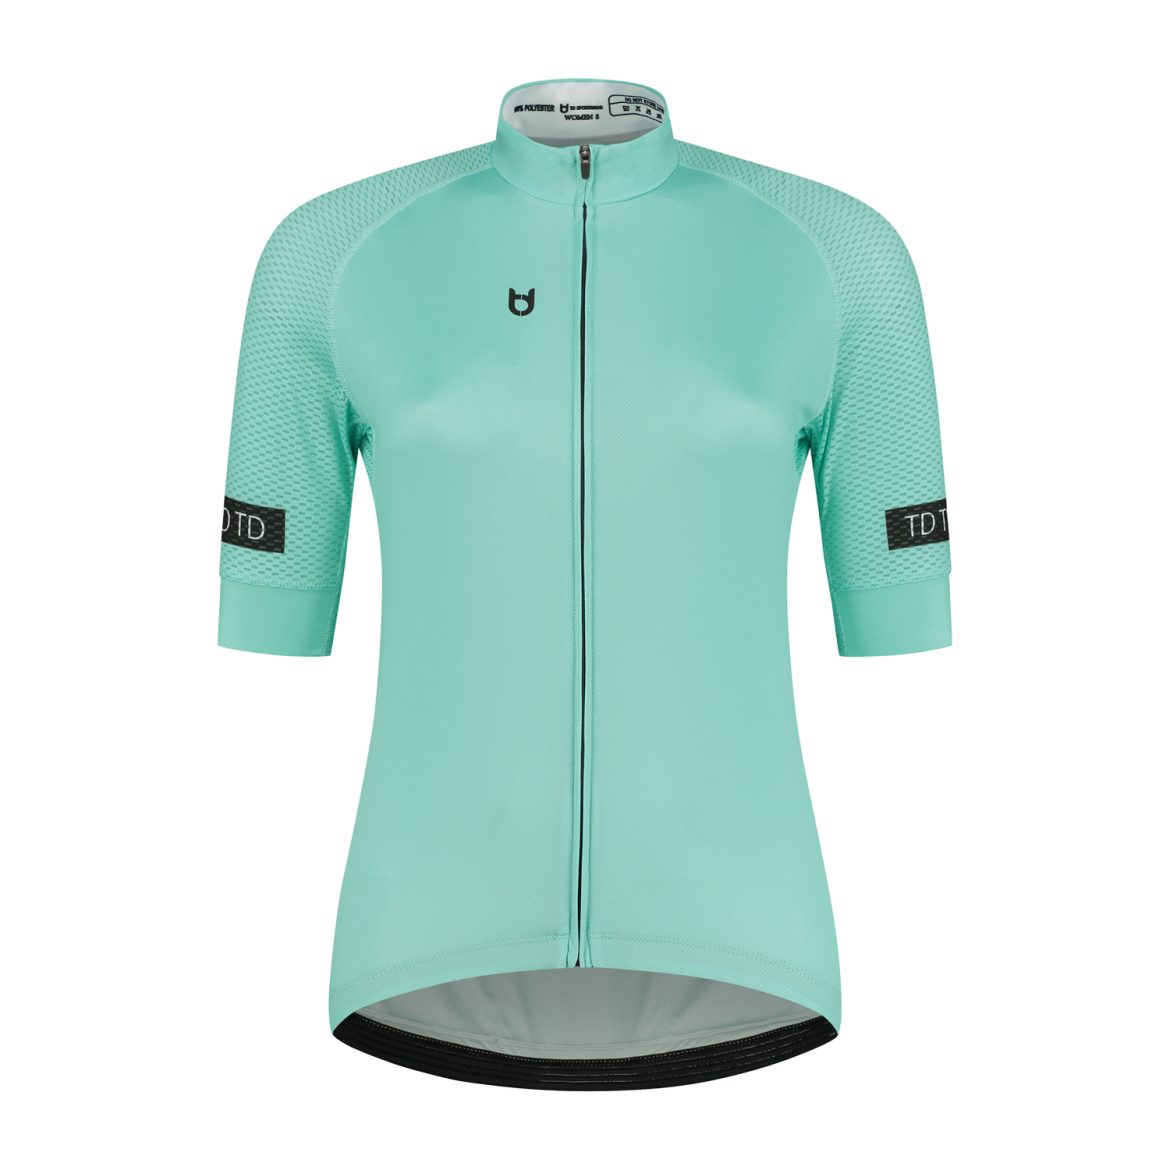 Front view women's cycling jersey short sleeve with celeste color from TD Sportswear